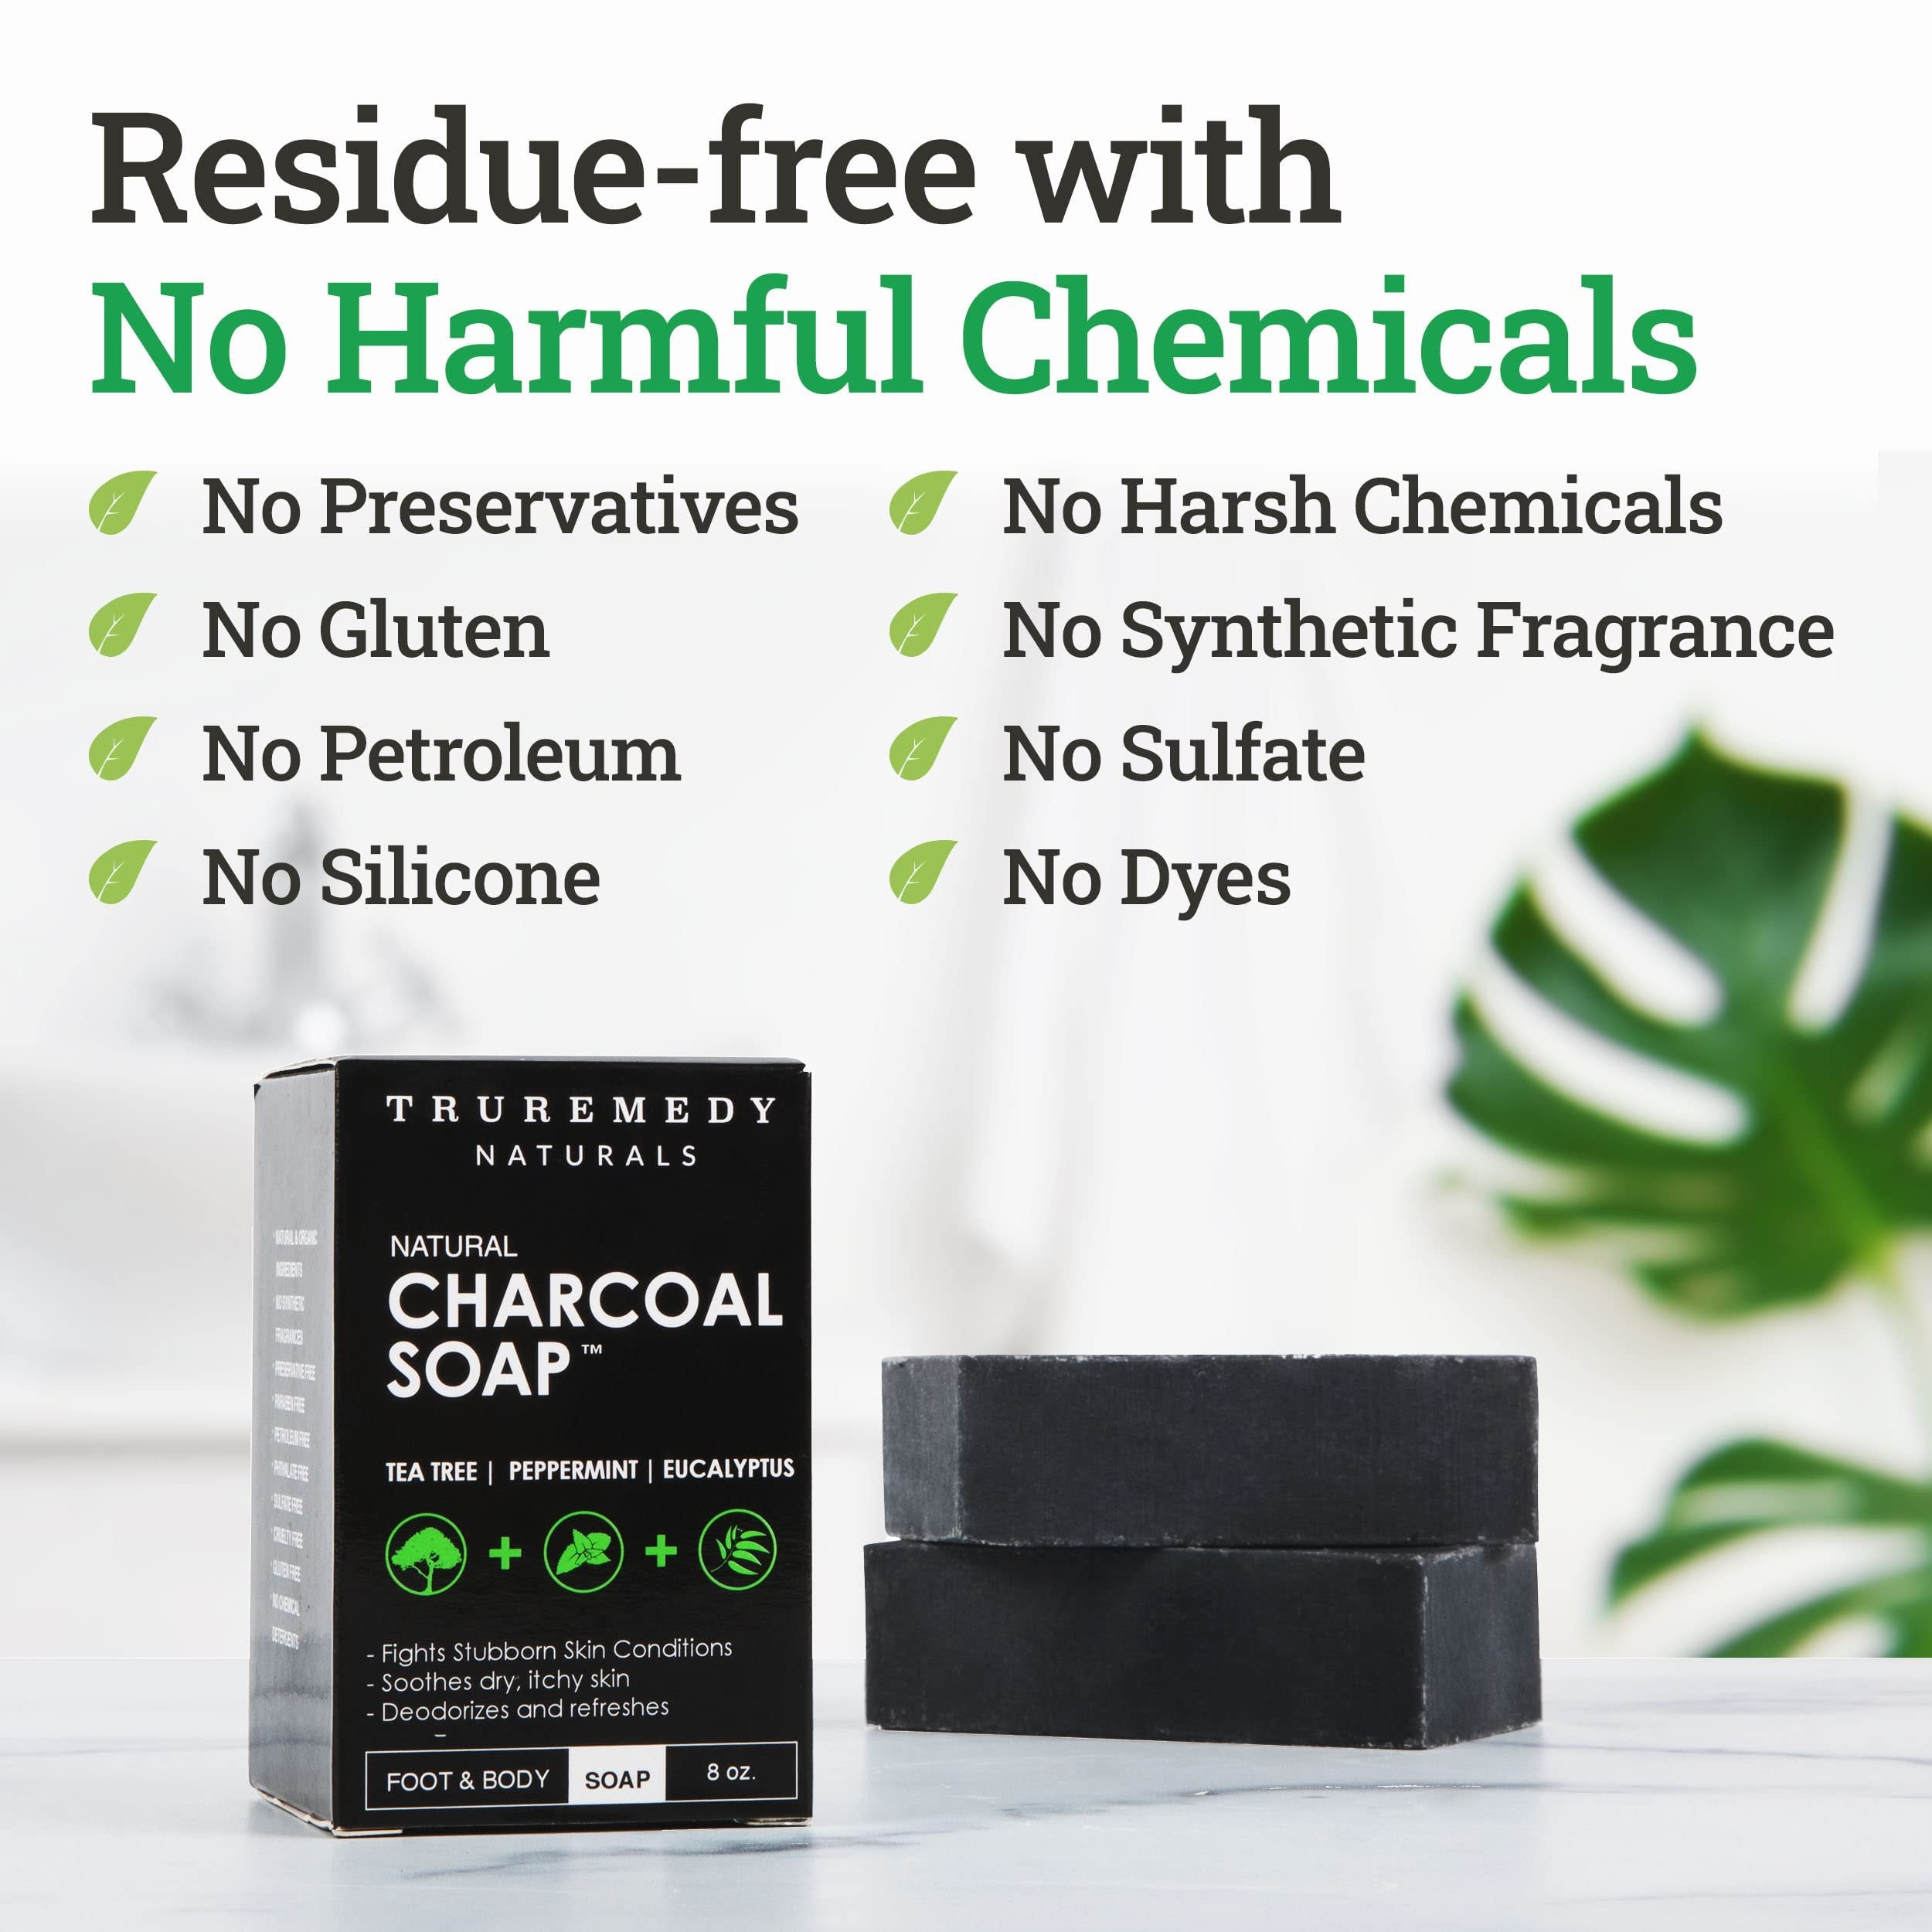 Natural Activated Charcoal Soap Bar (2-Pack) - Hand, Foot & Body Soap - Tea Tree, Peppermint & Charcoal Soap - Vegan, Cruelty Free - Made In USA - 8 Oz